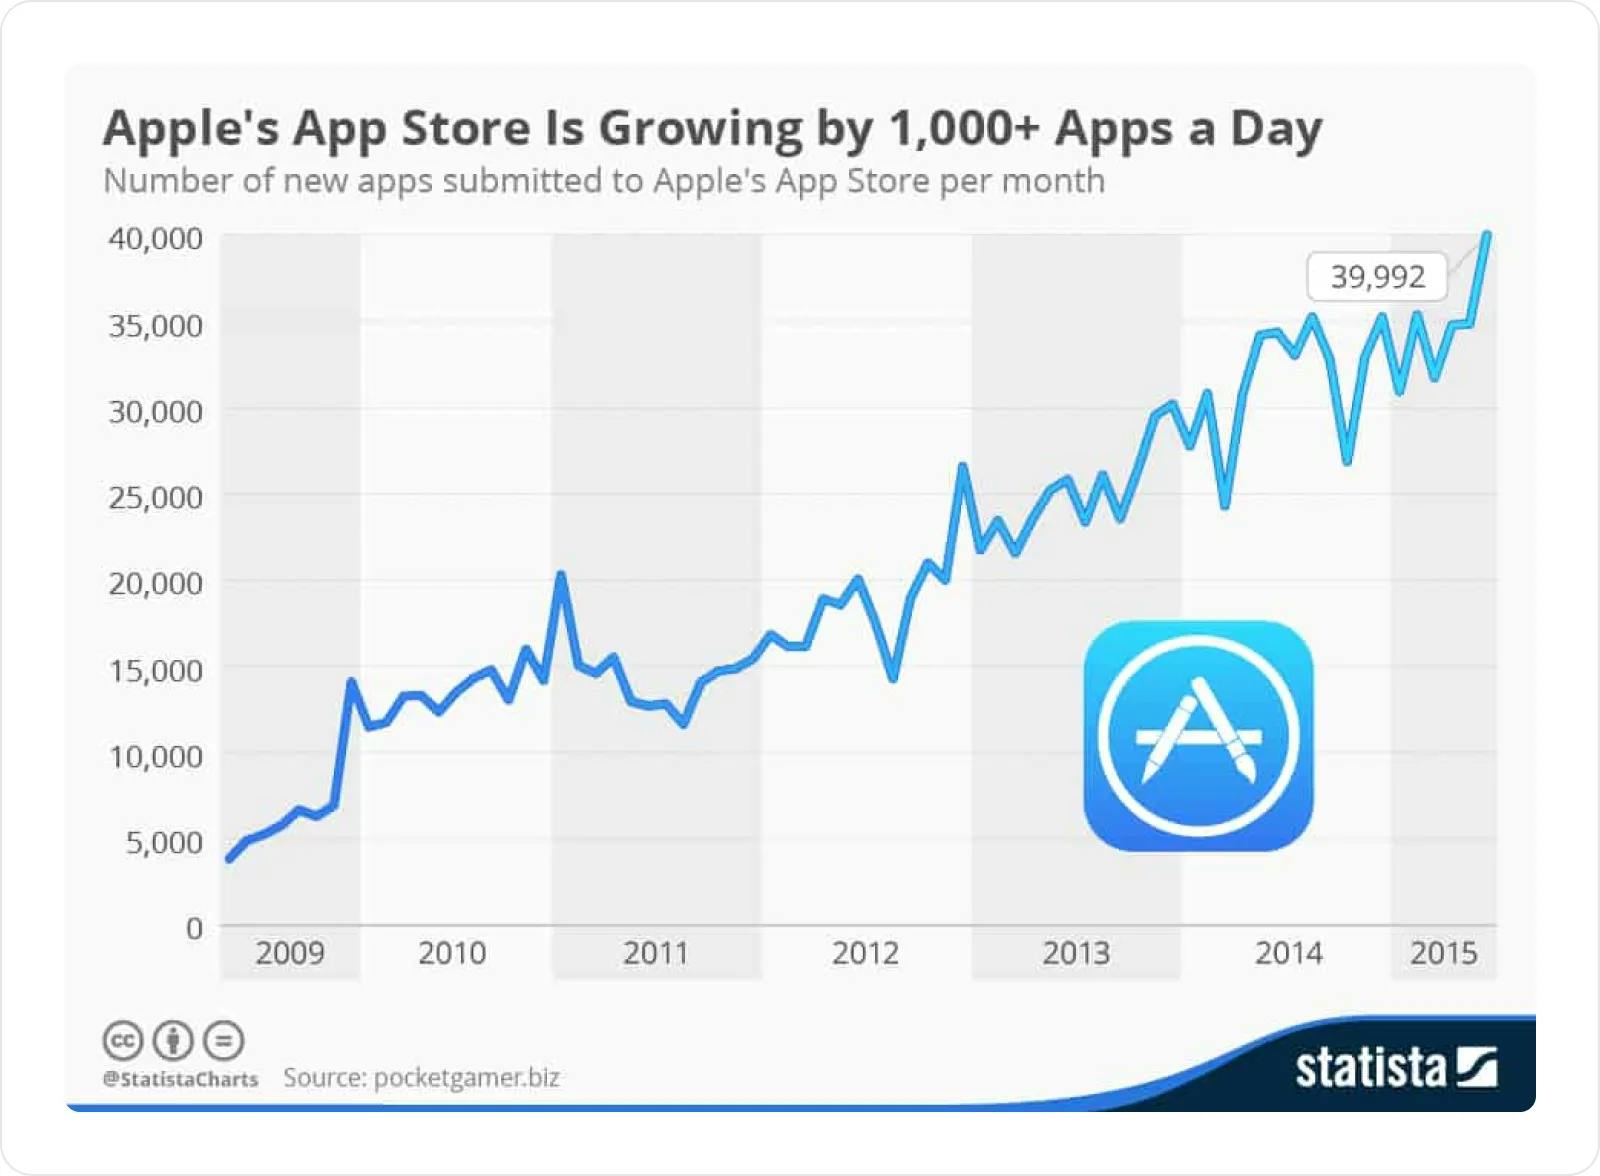 Apple's app store is growing by 1000+ Apps a Day